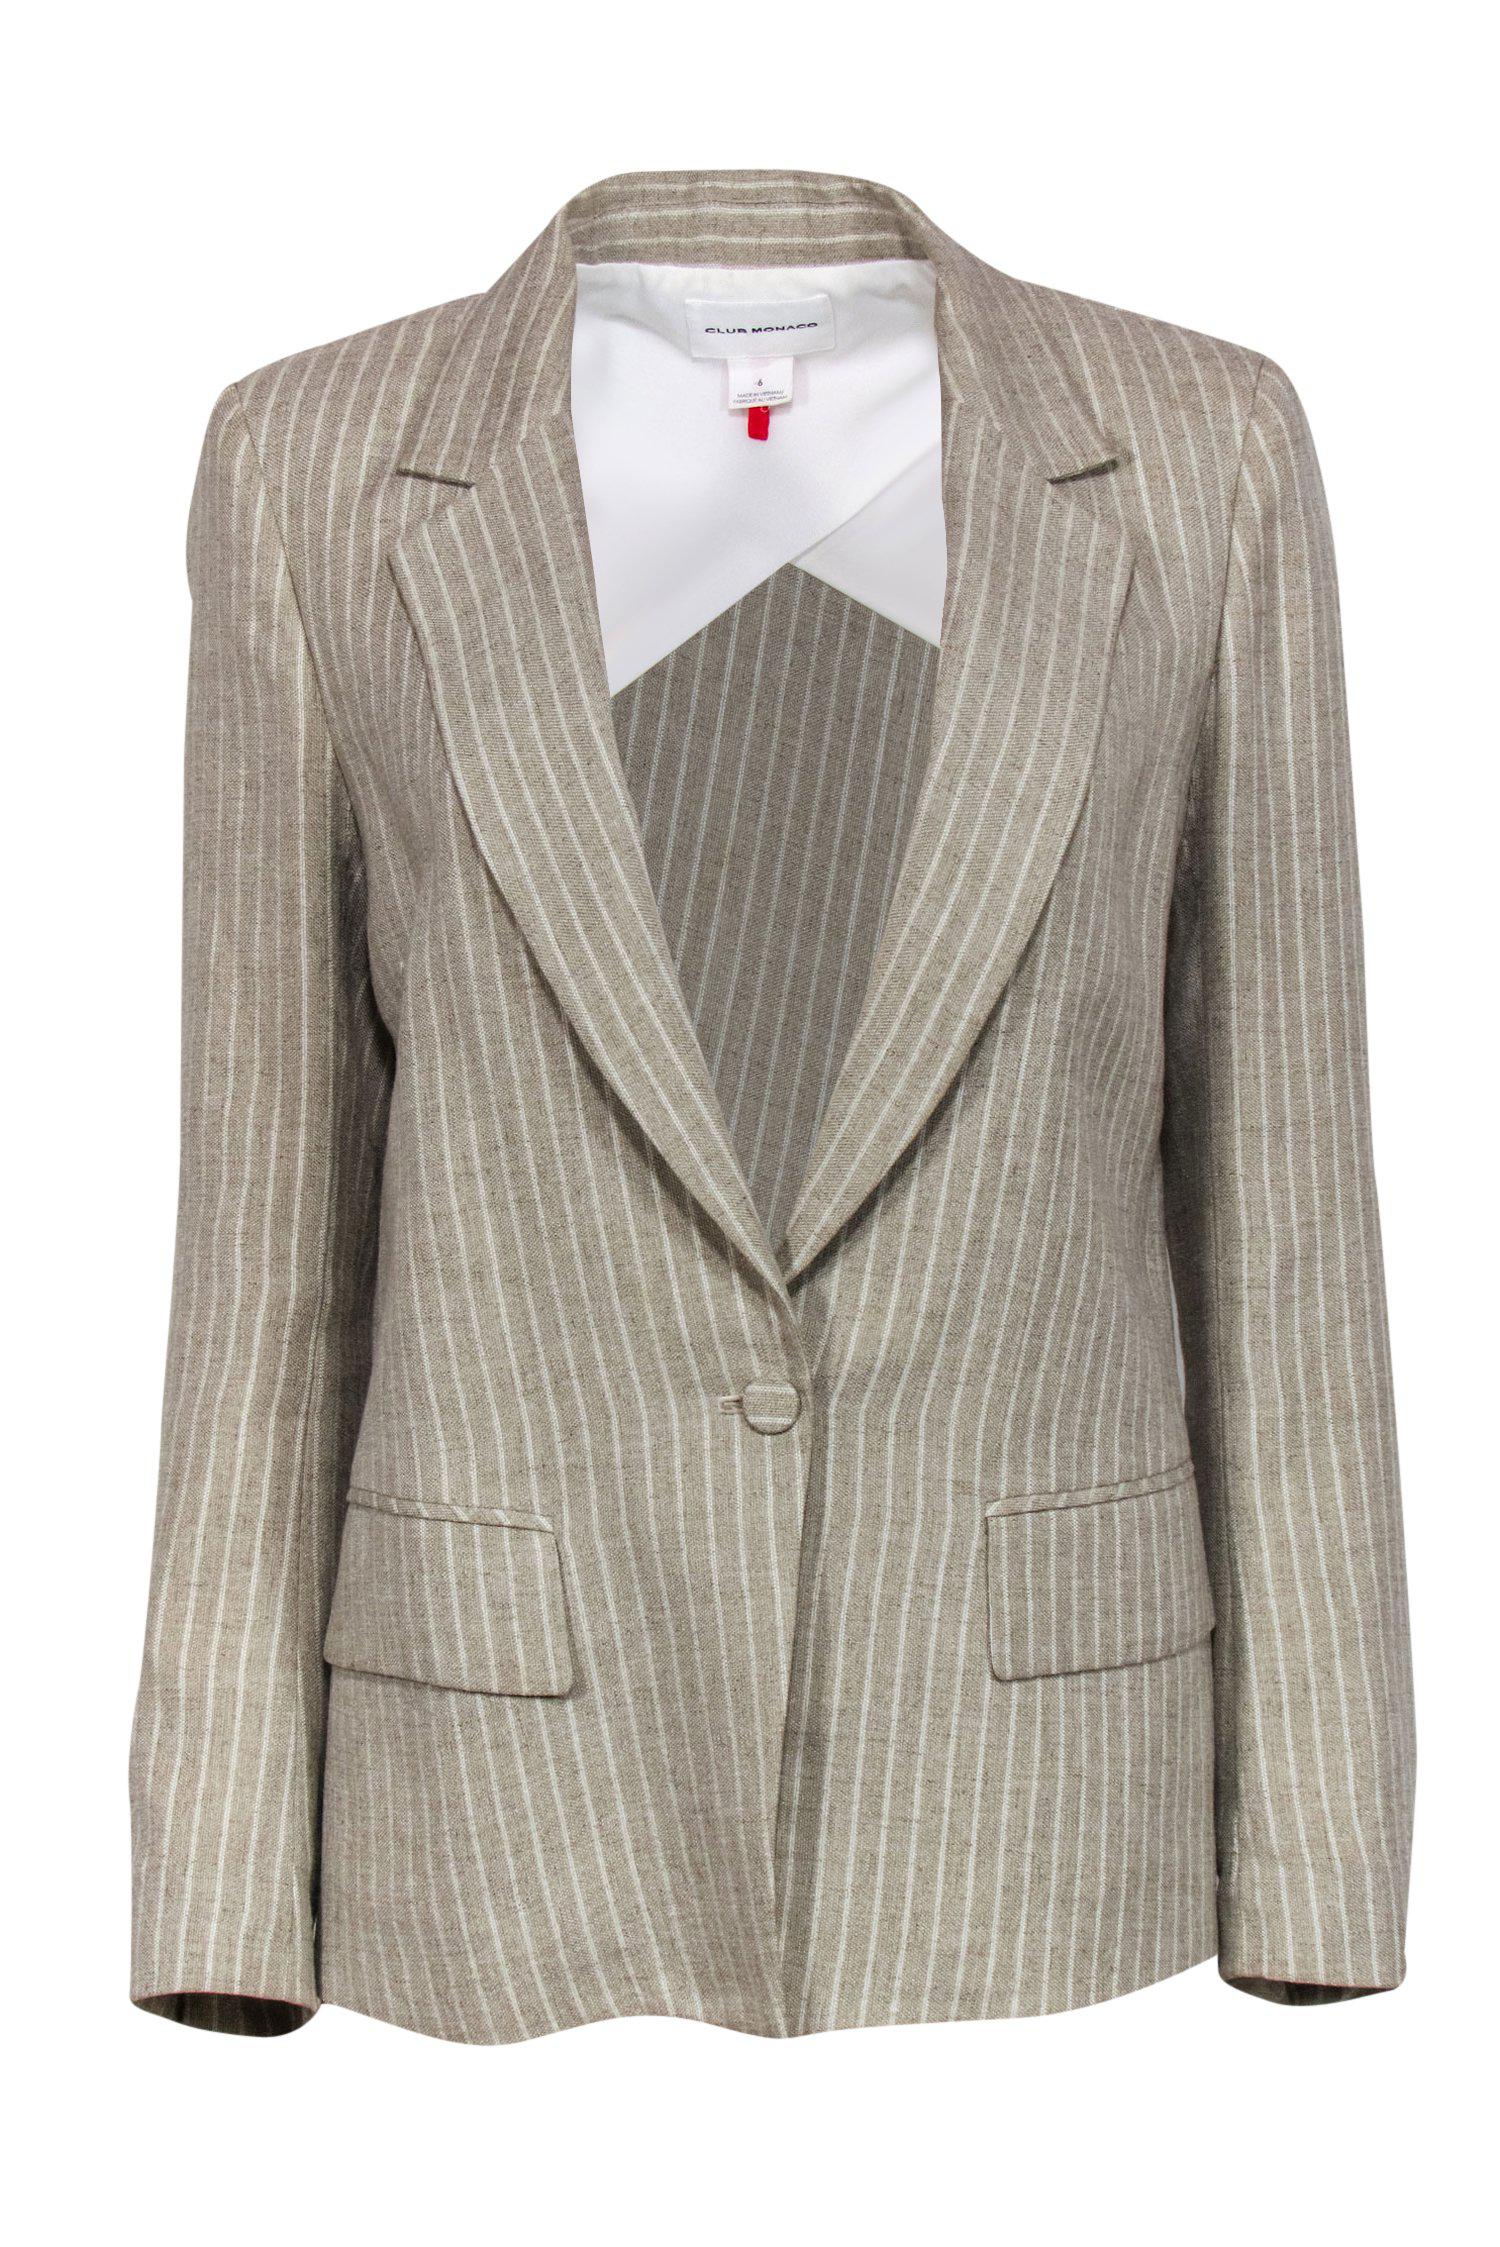 SOOK: Shopping Discovery: Find & Buy Direct: Club Monaco - Beige Striped  